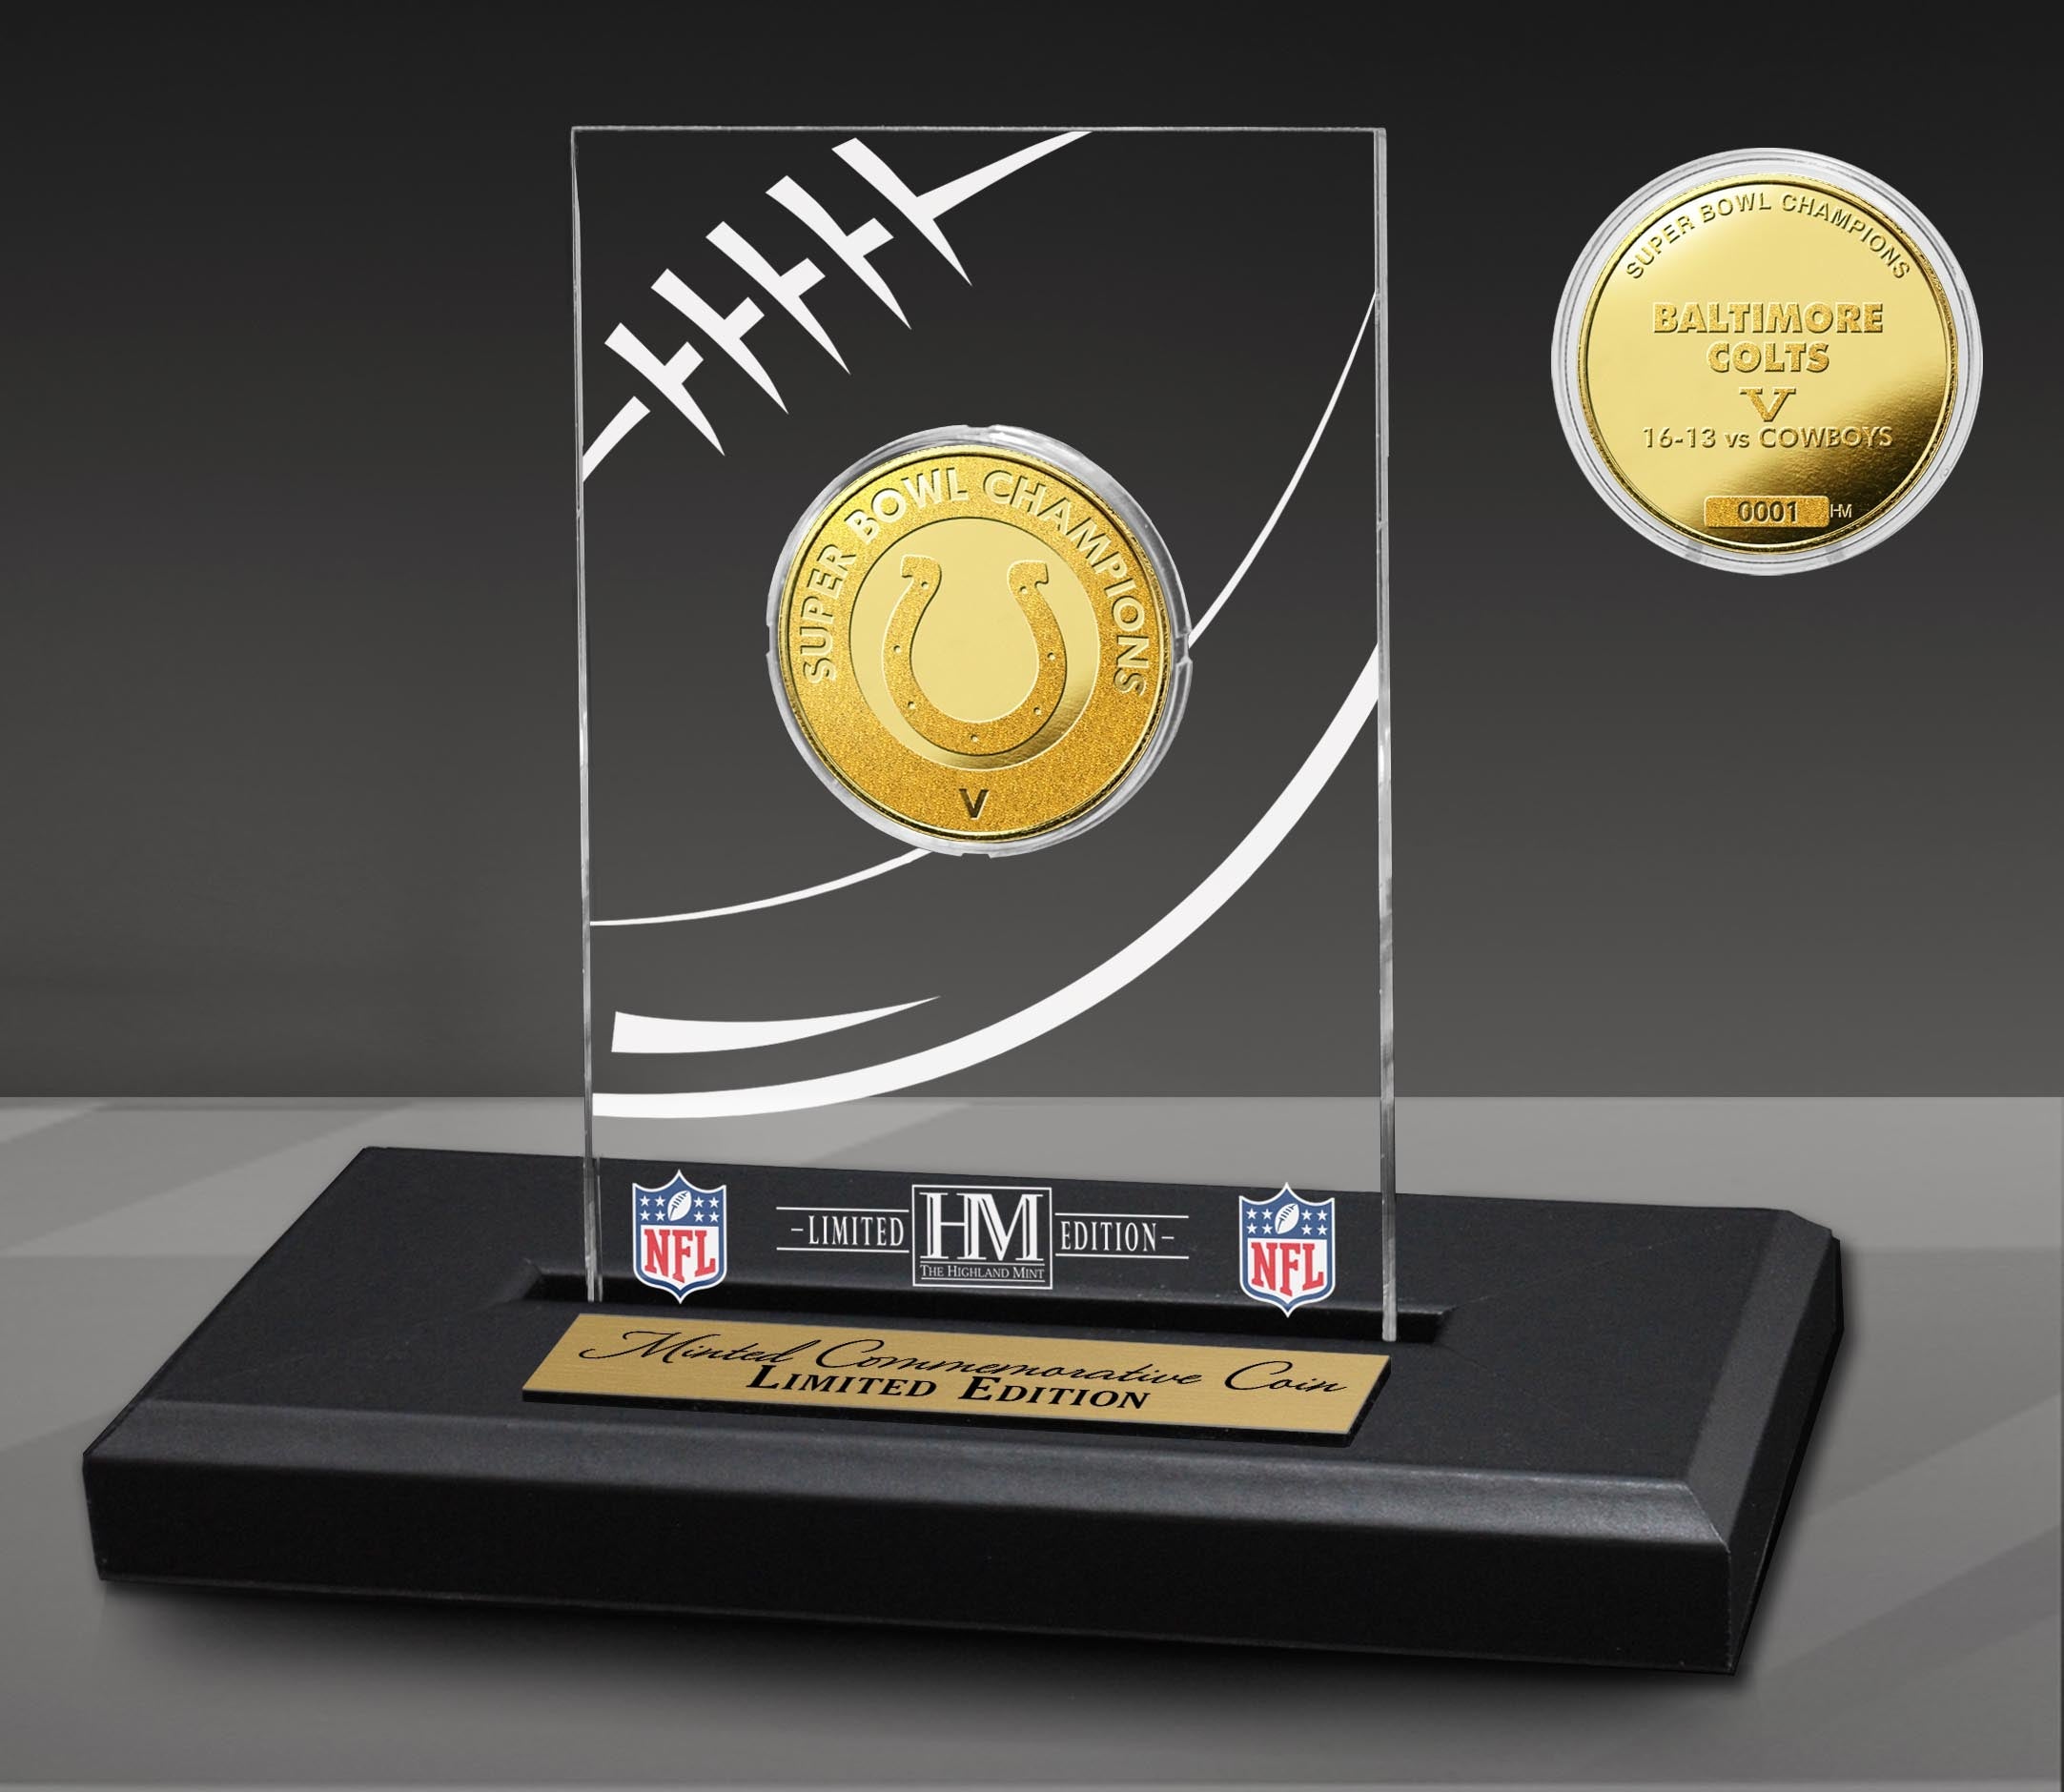 Baltimore Colts Super Bowl Champions Gold Coin with Acrylic Display